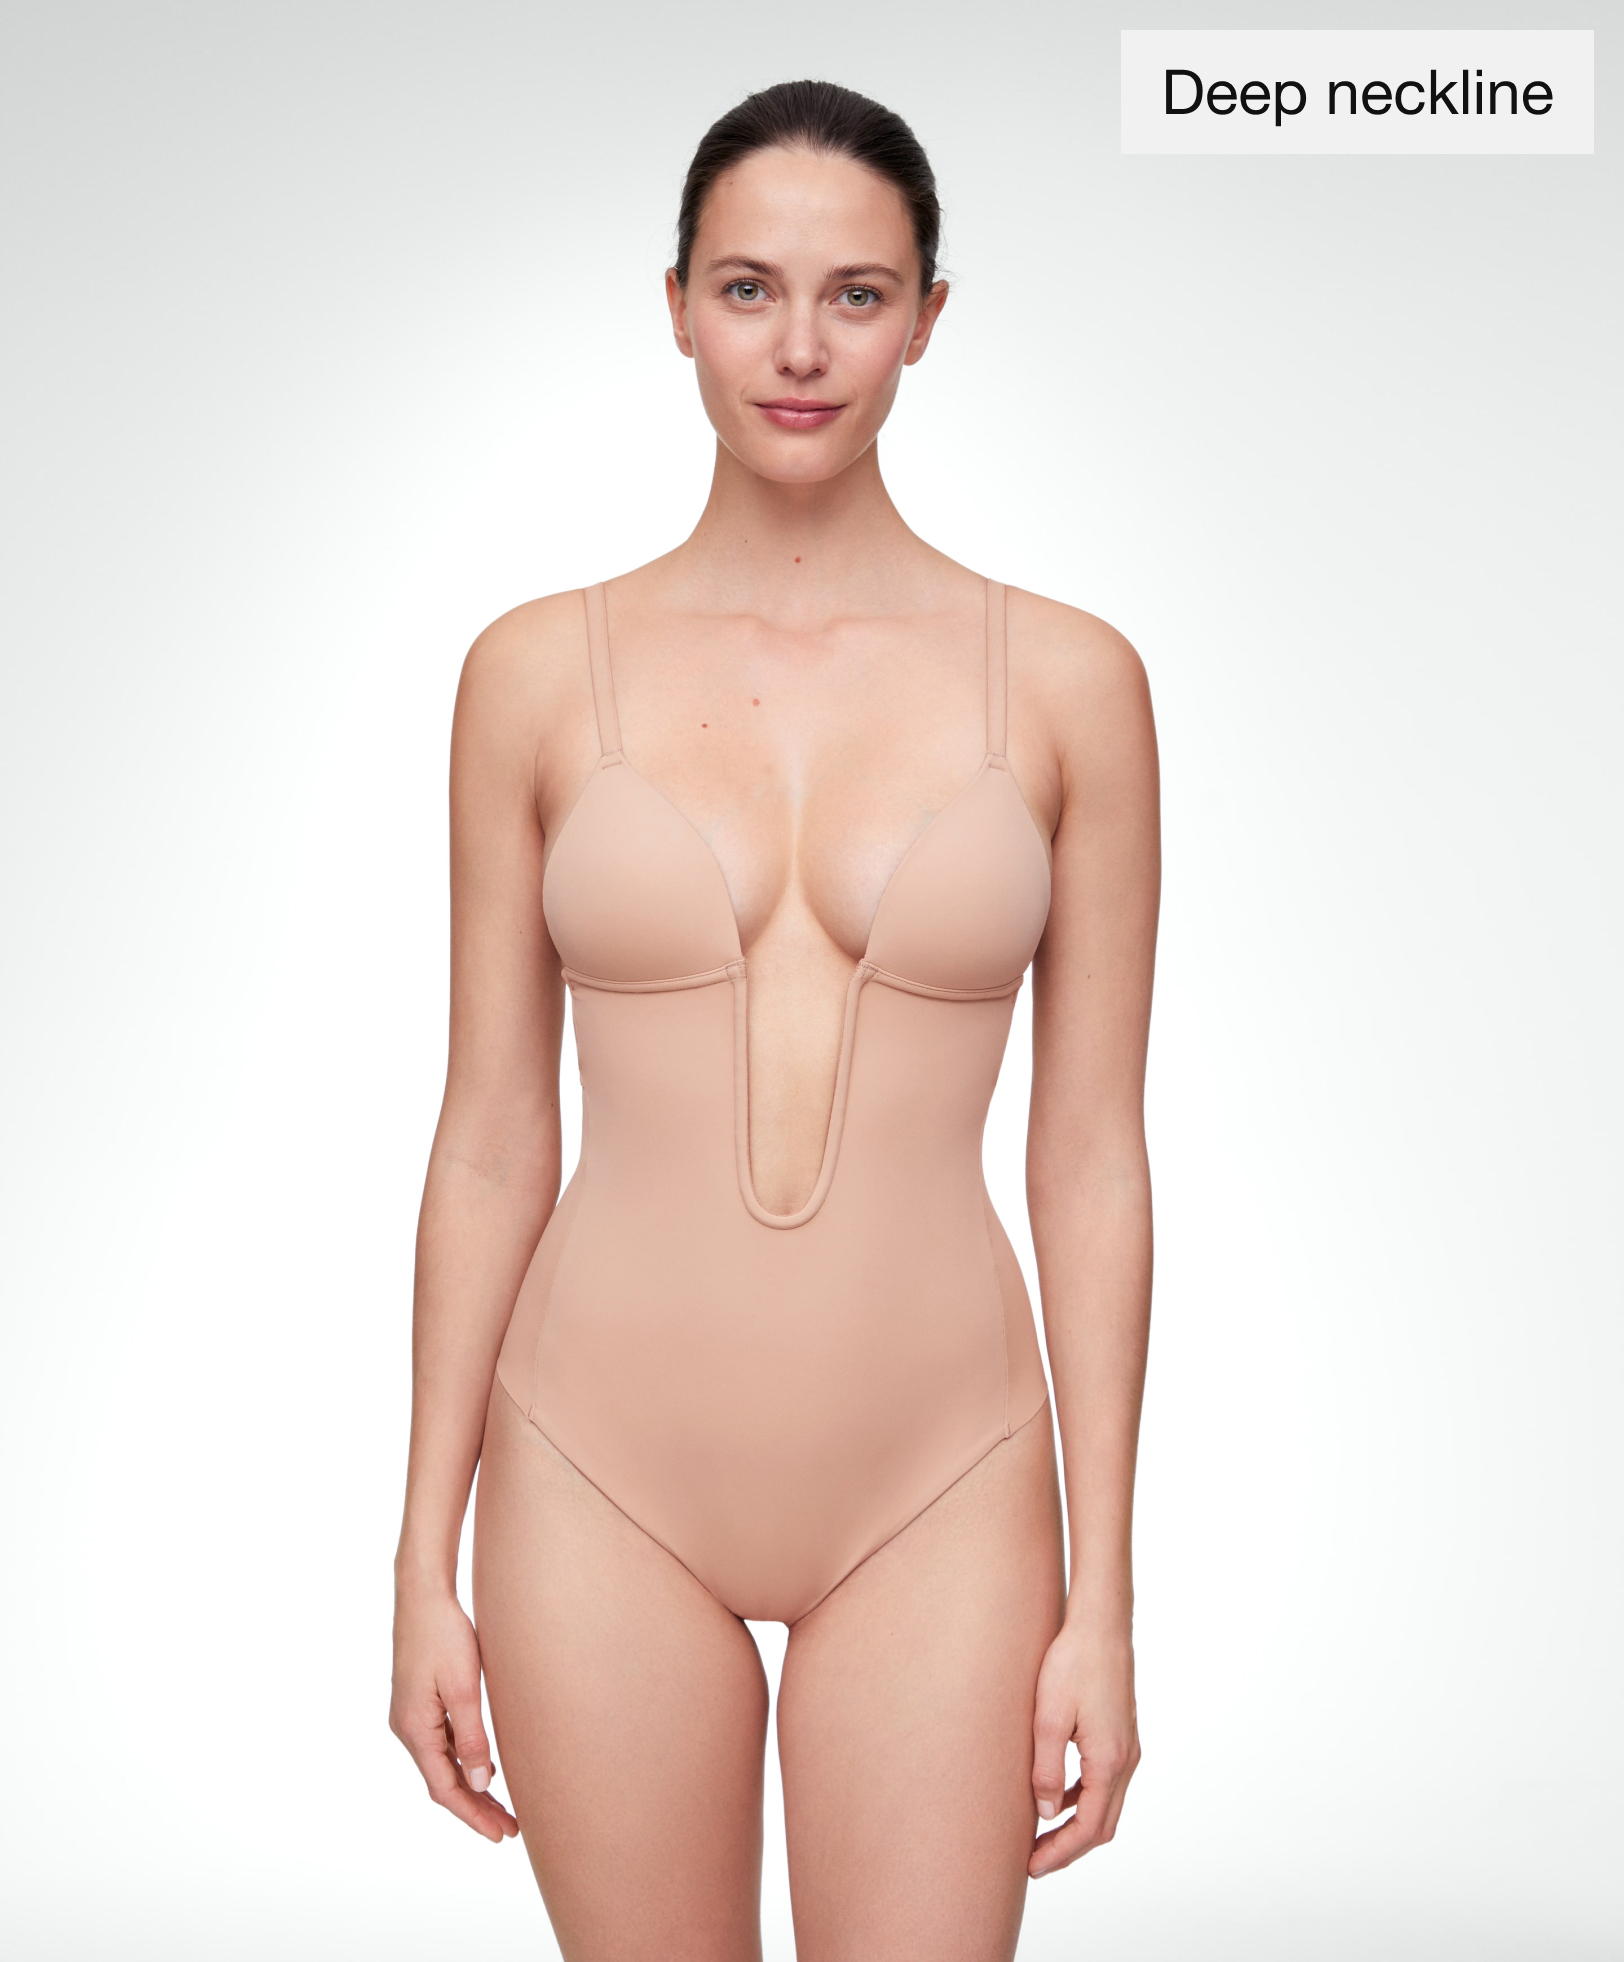 Polyamide blend strappy body with open back